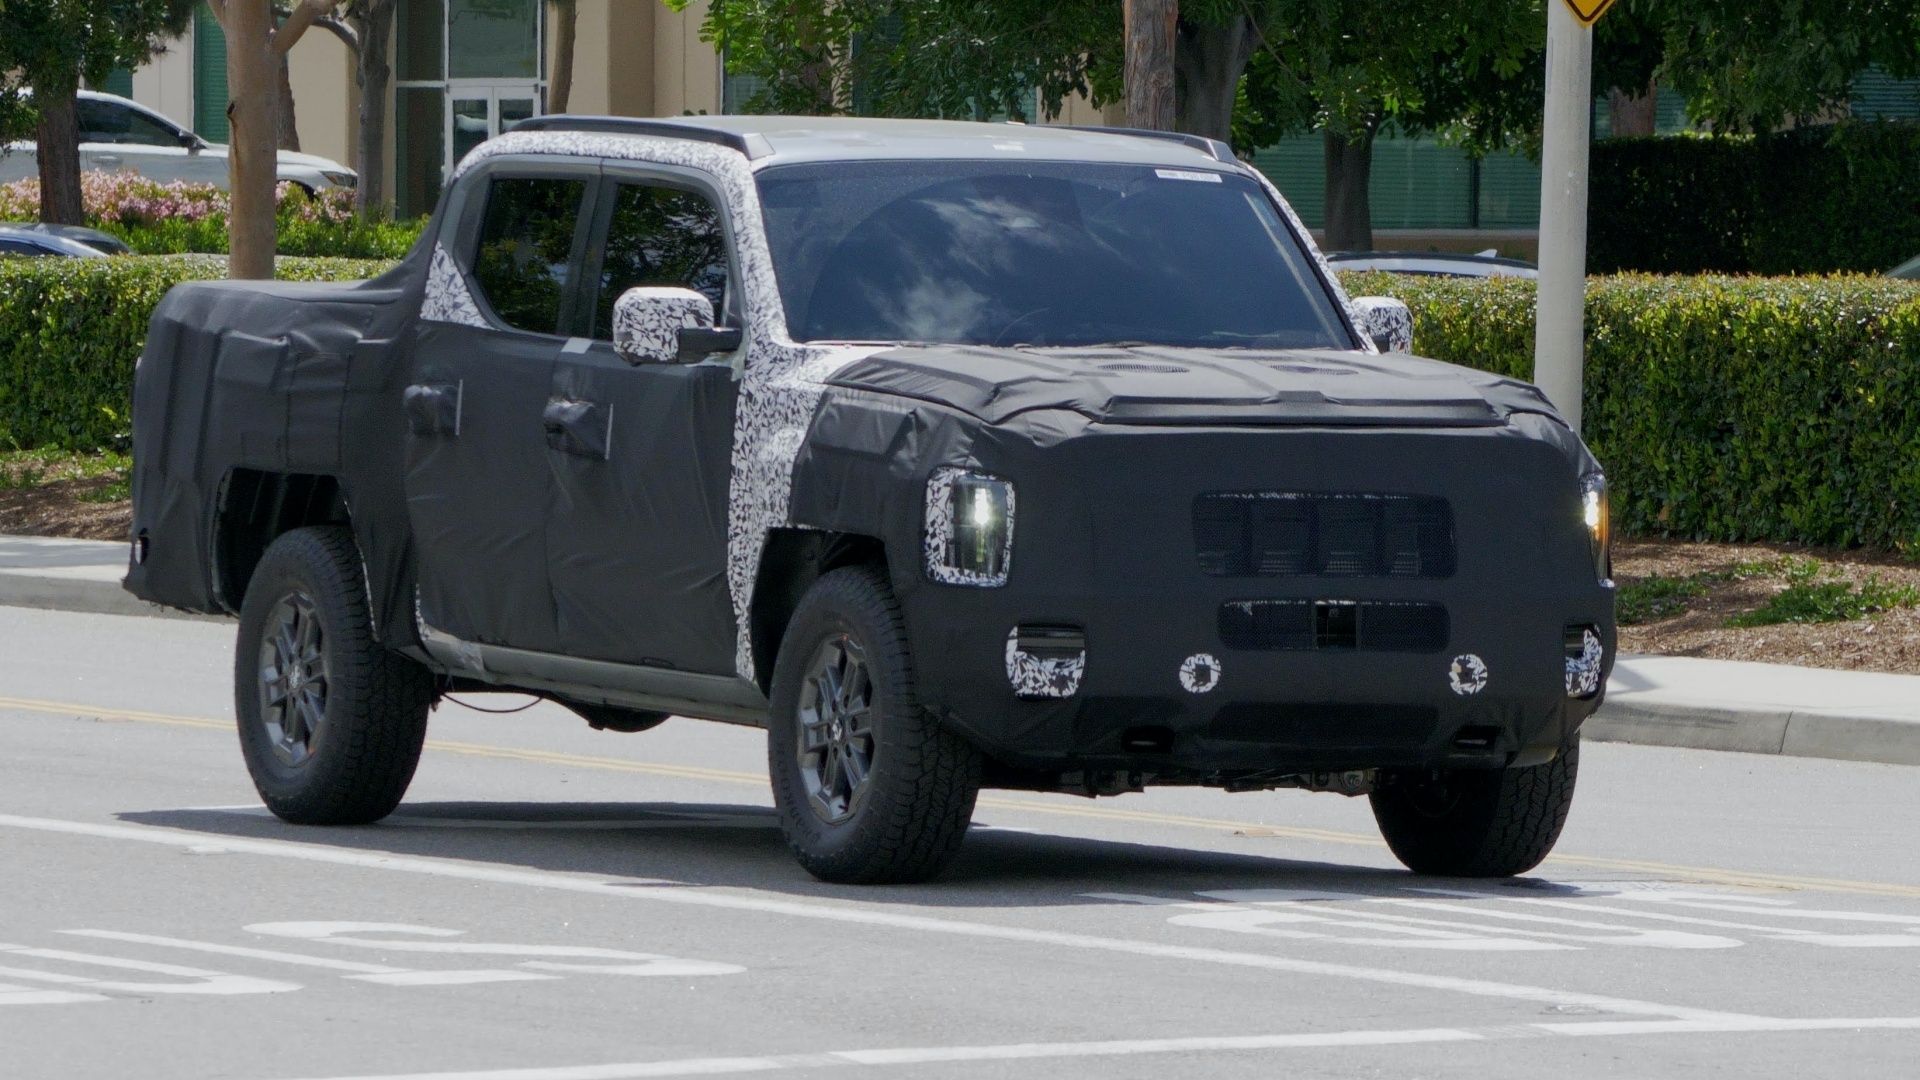 The Toyota Tacoma Fighter From Kia Was Spotted On US Roads